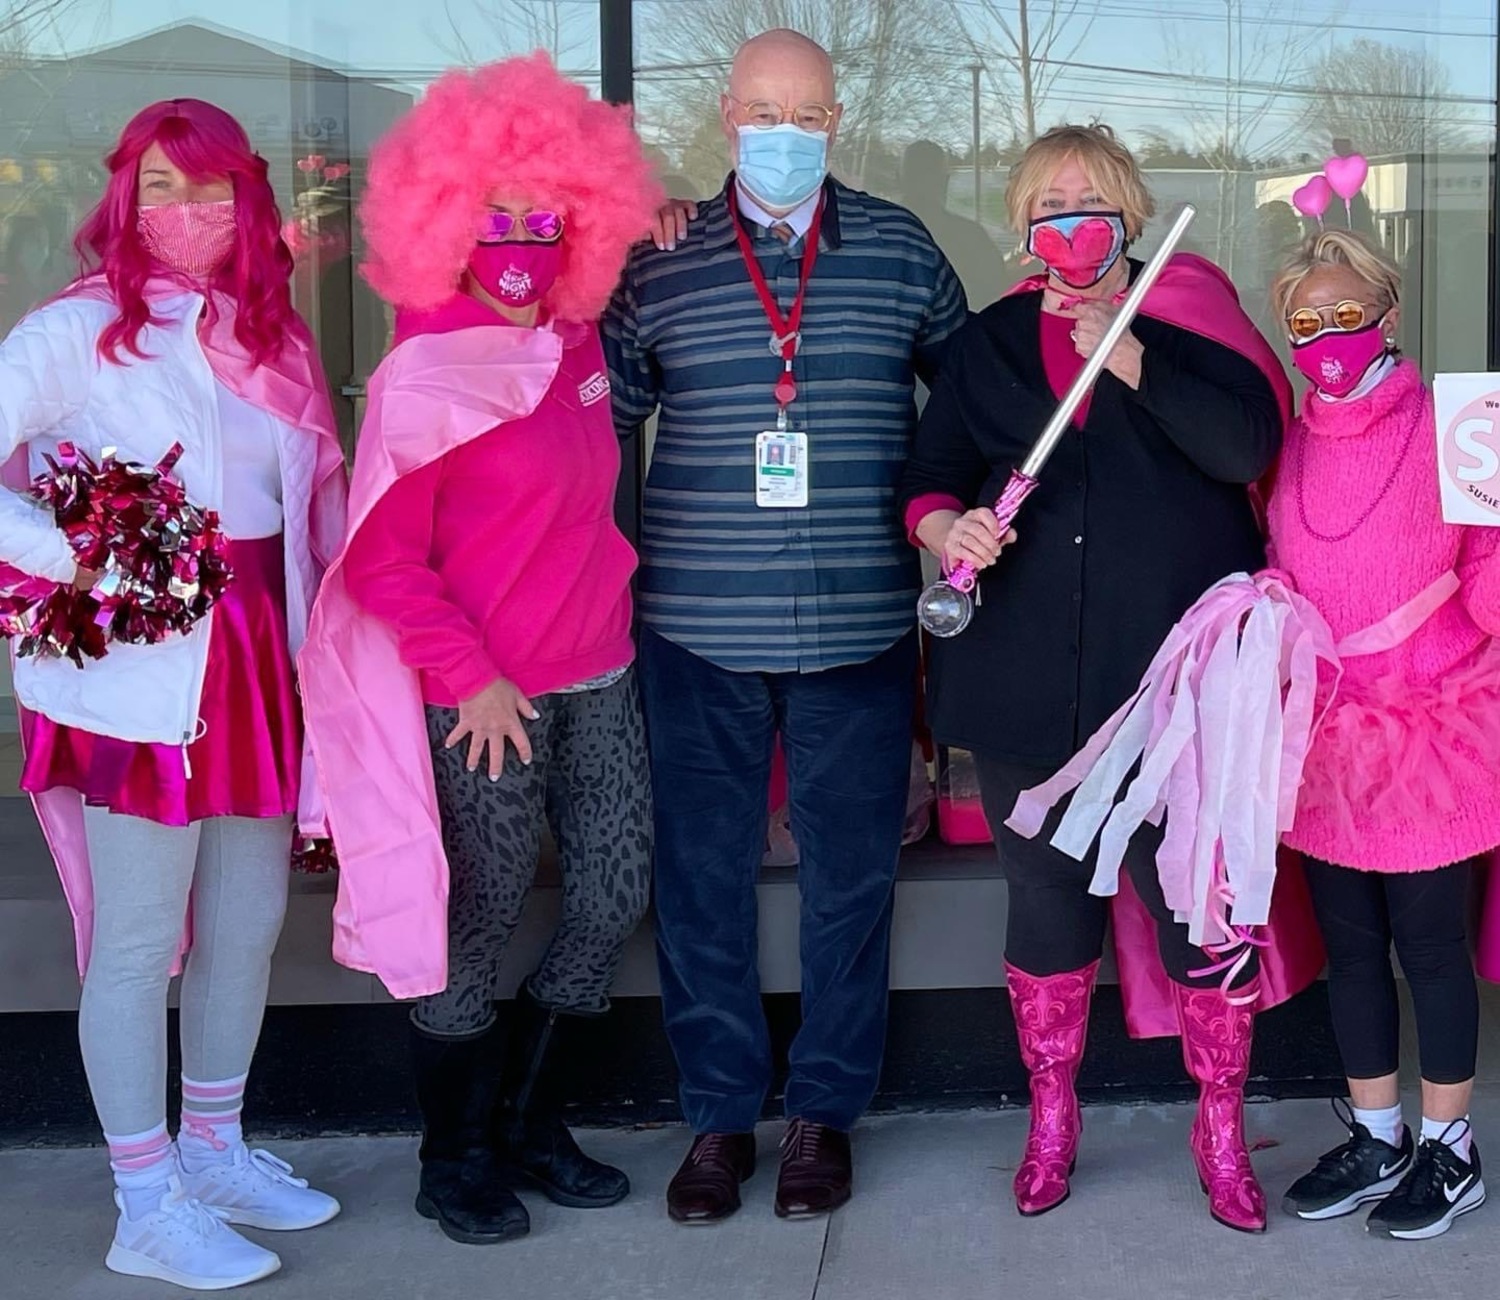 Susie Roden, president of the Coalition for Women’s Cancers at Stony Brook Southampton Hospital and vice president of Lucia’s Angels, clutches a saber and dons her famous pink boots as she heads into radiation, surrounded by her friends and radiation oncologist Dr. Edward Valentine.